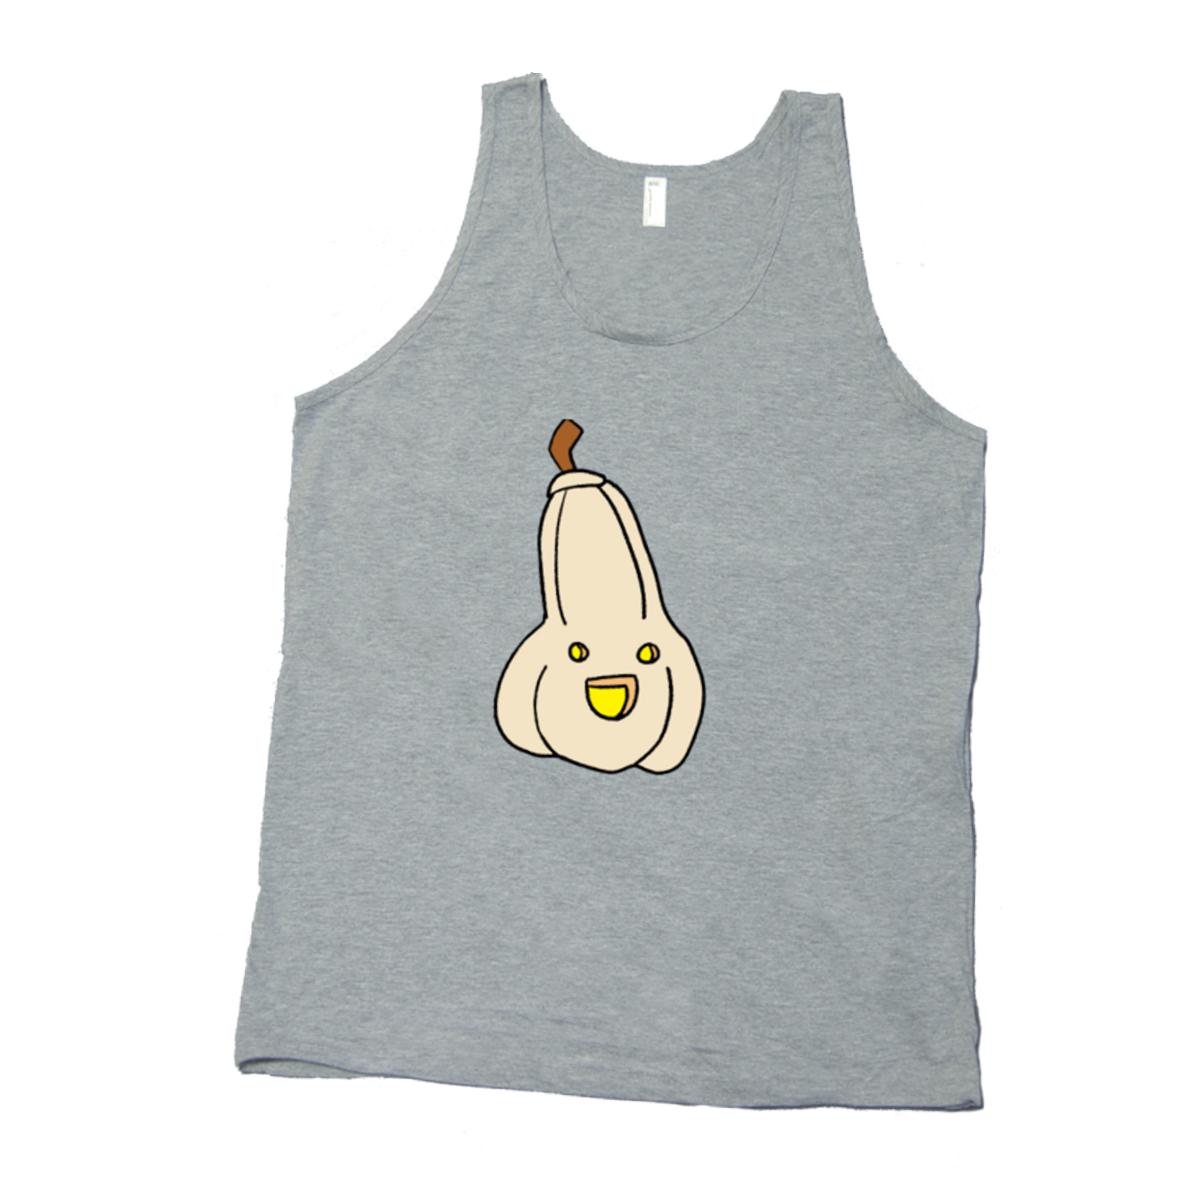 The New Guy Unisex Tank Top Large heather-grey